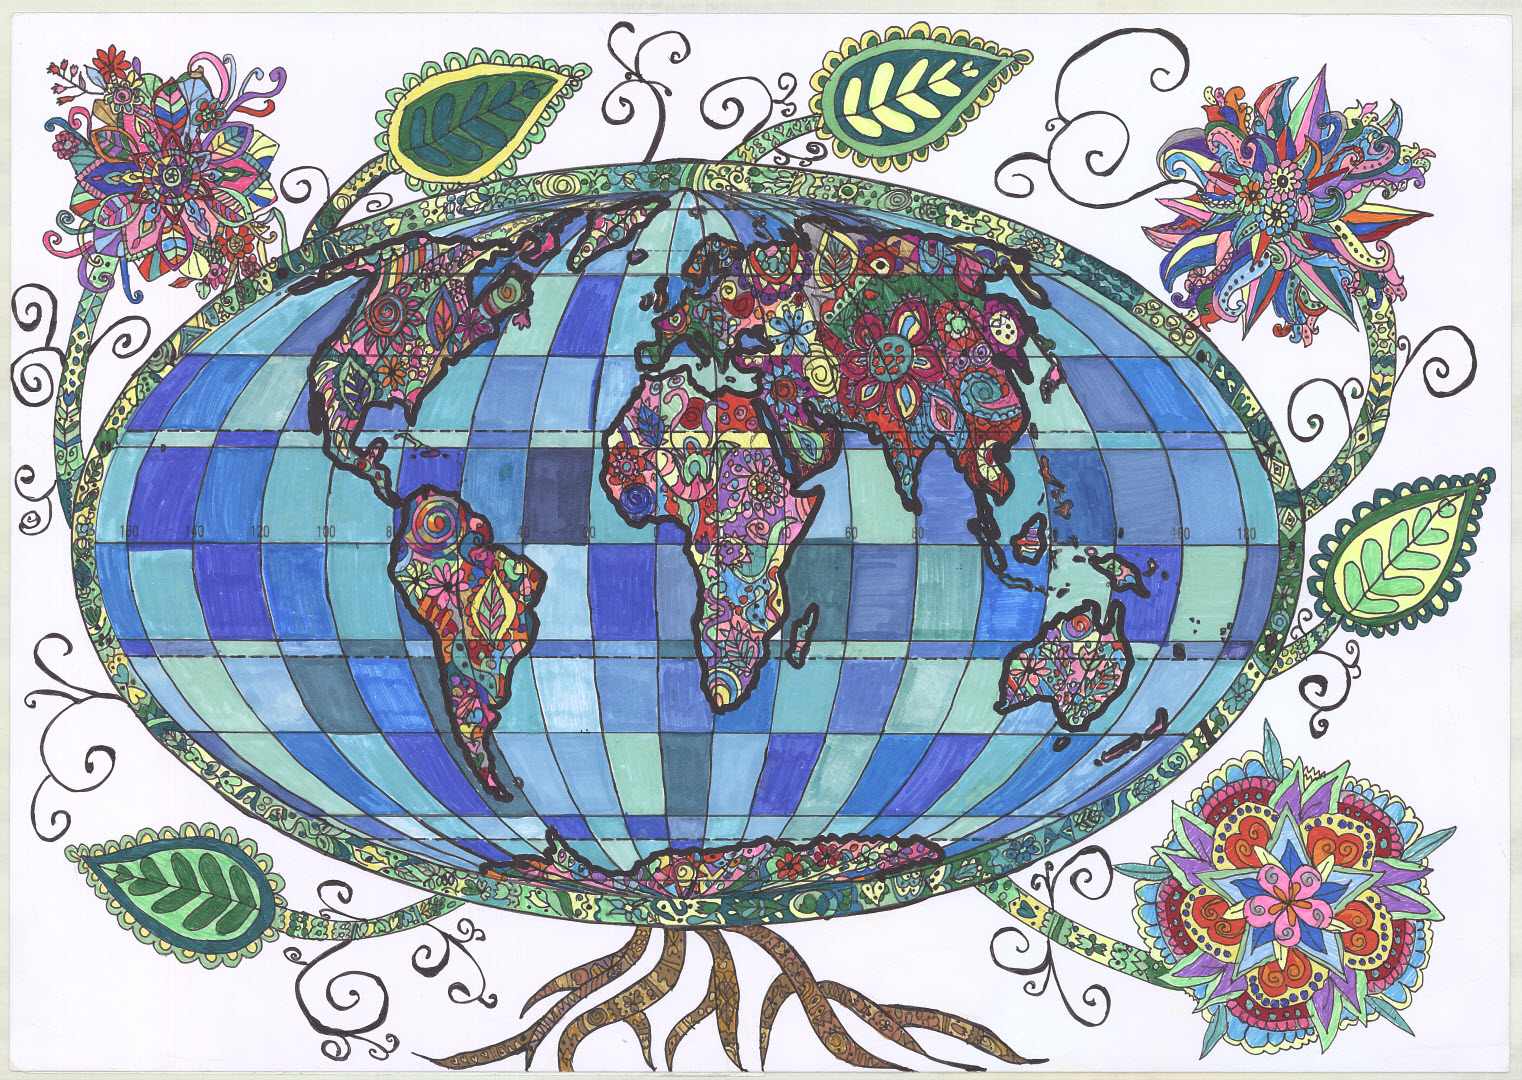 Shows the planet covered in flowers, plants and trees